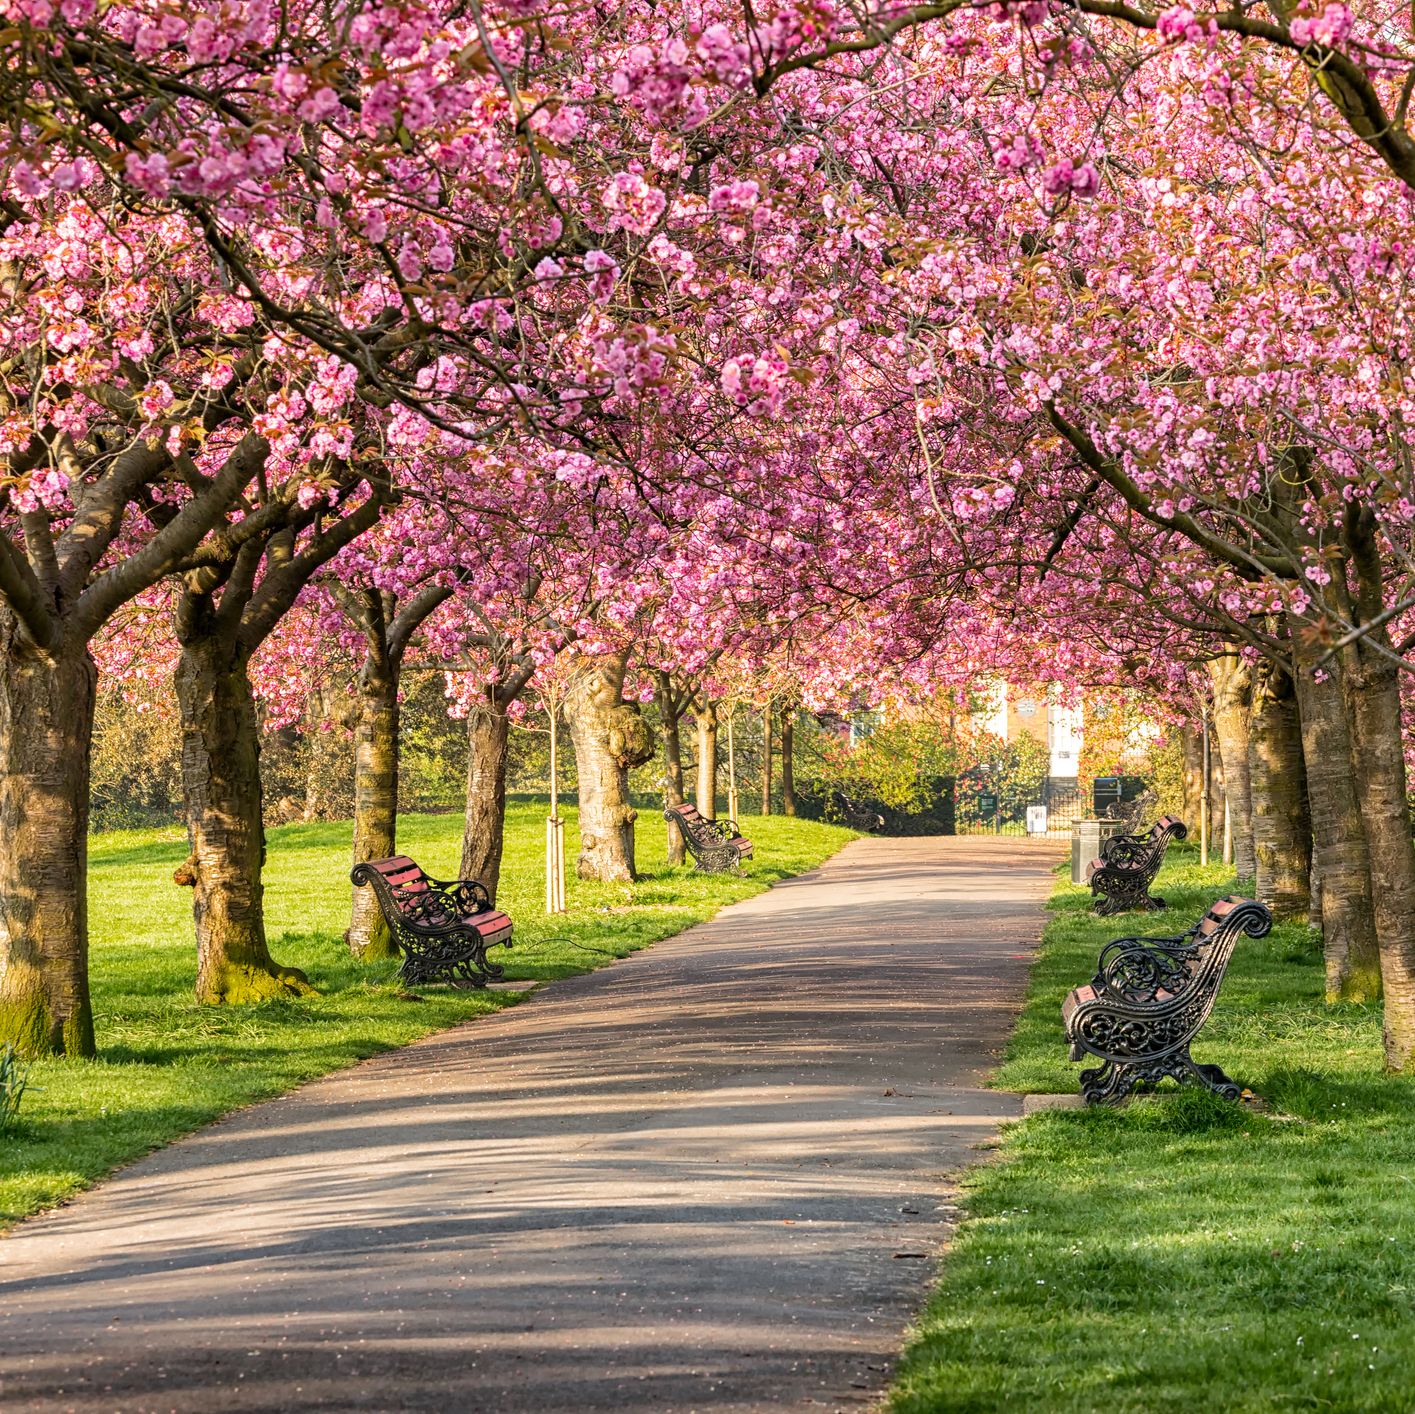 10 best uk cities to see spring flowers in 2021